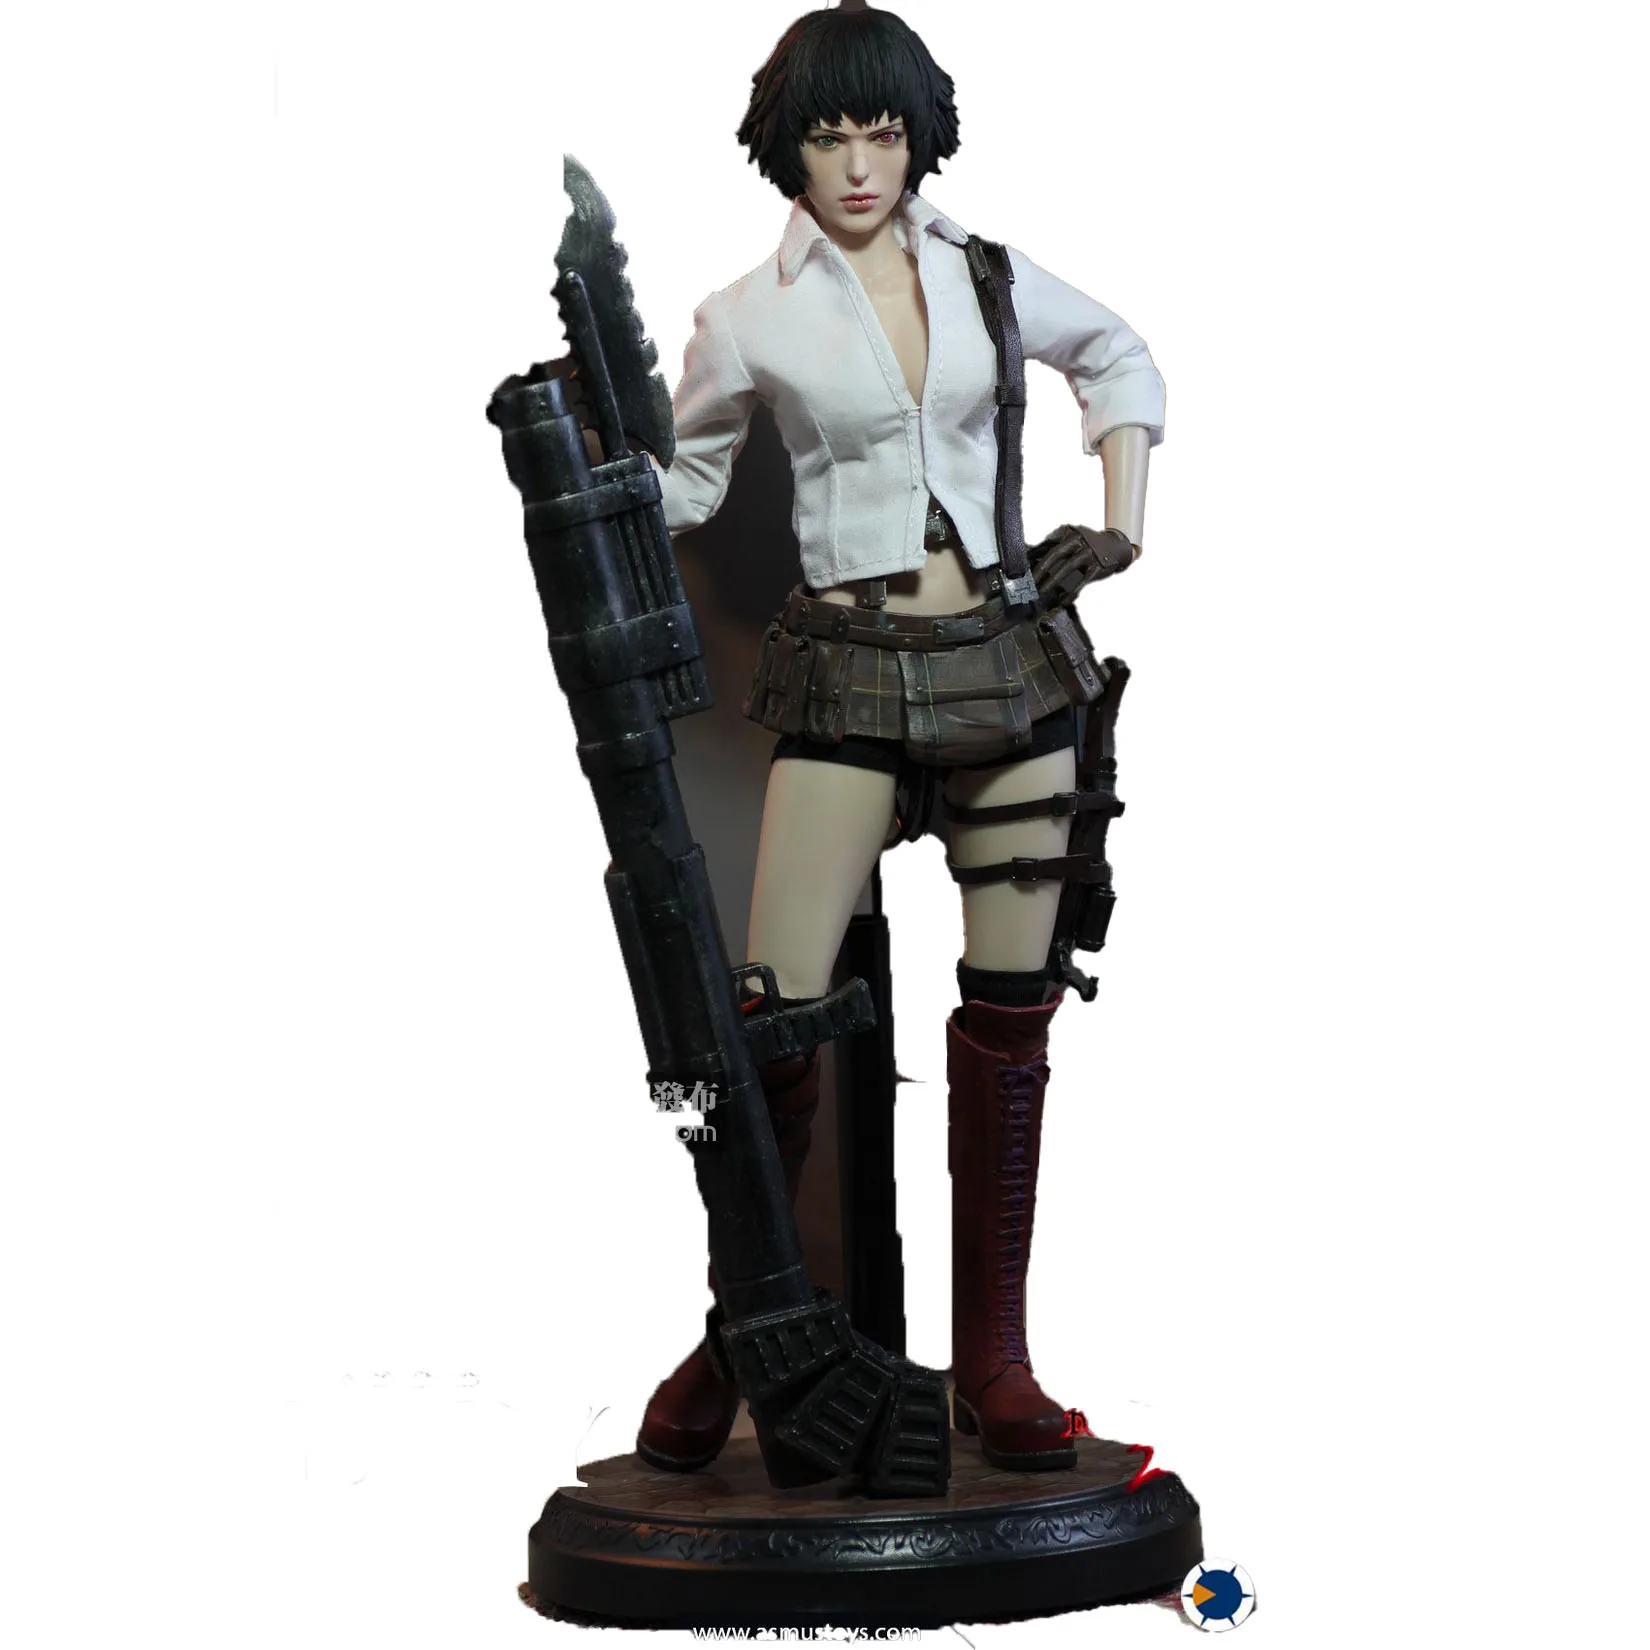 

In Stock 100% Original Asmus Toys DMC302 1/6 Devil May Cry DMC Lady Game Female Warrior Action Model Art Collection Toy Gifts